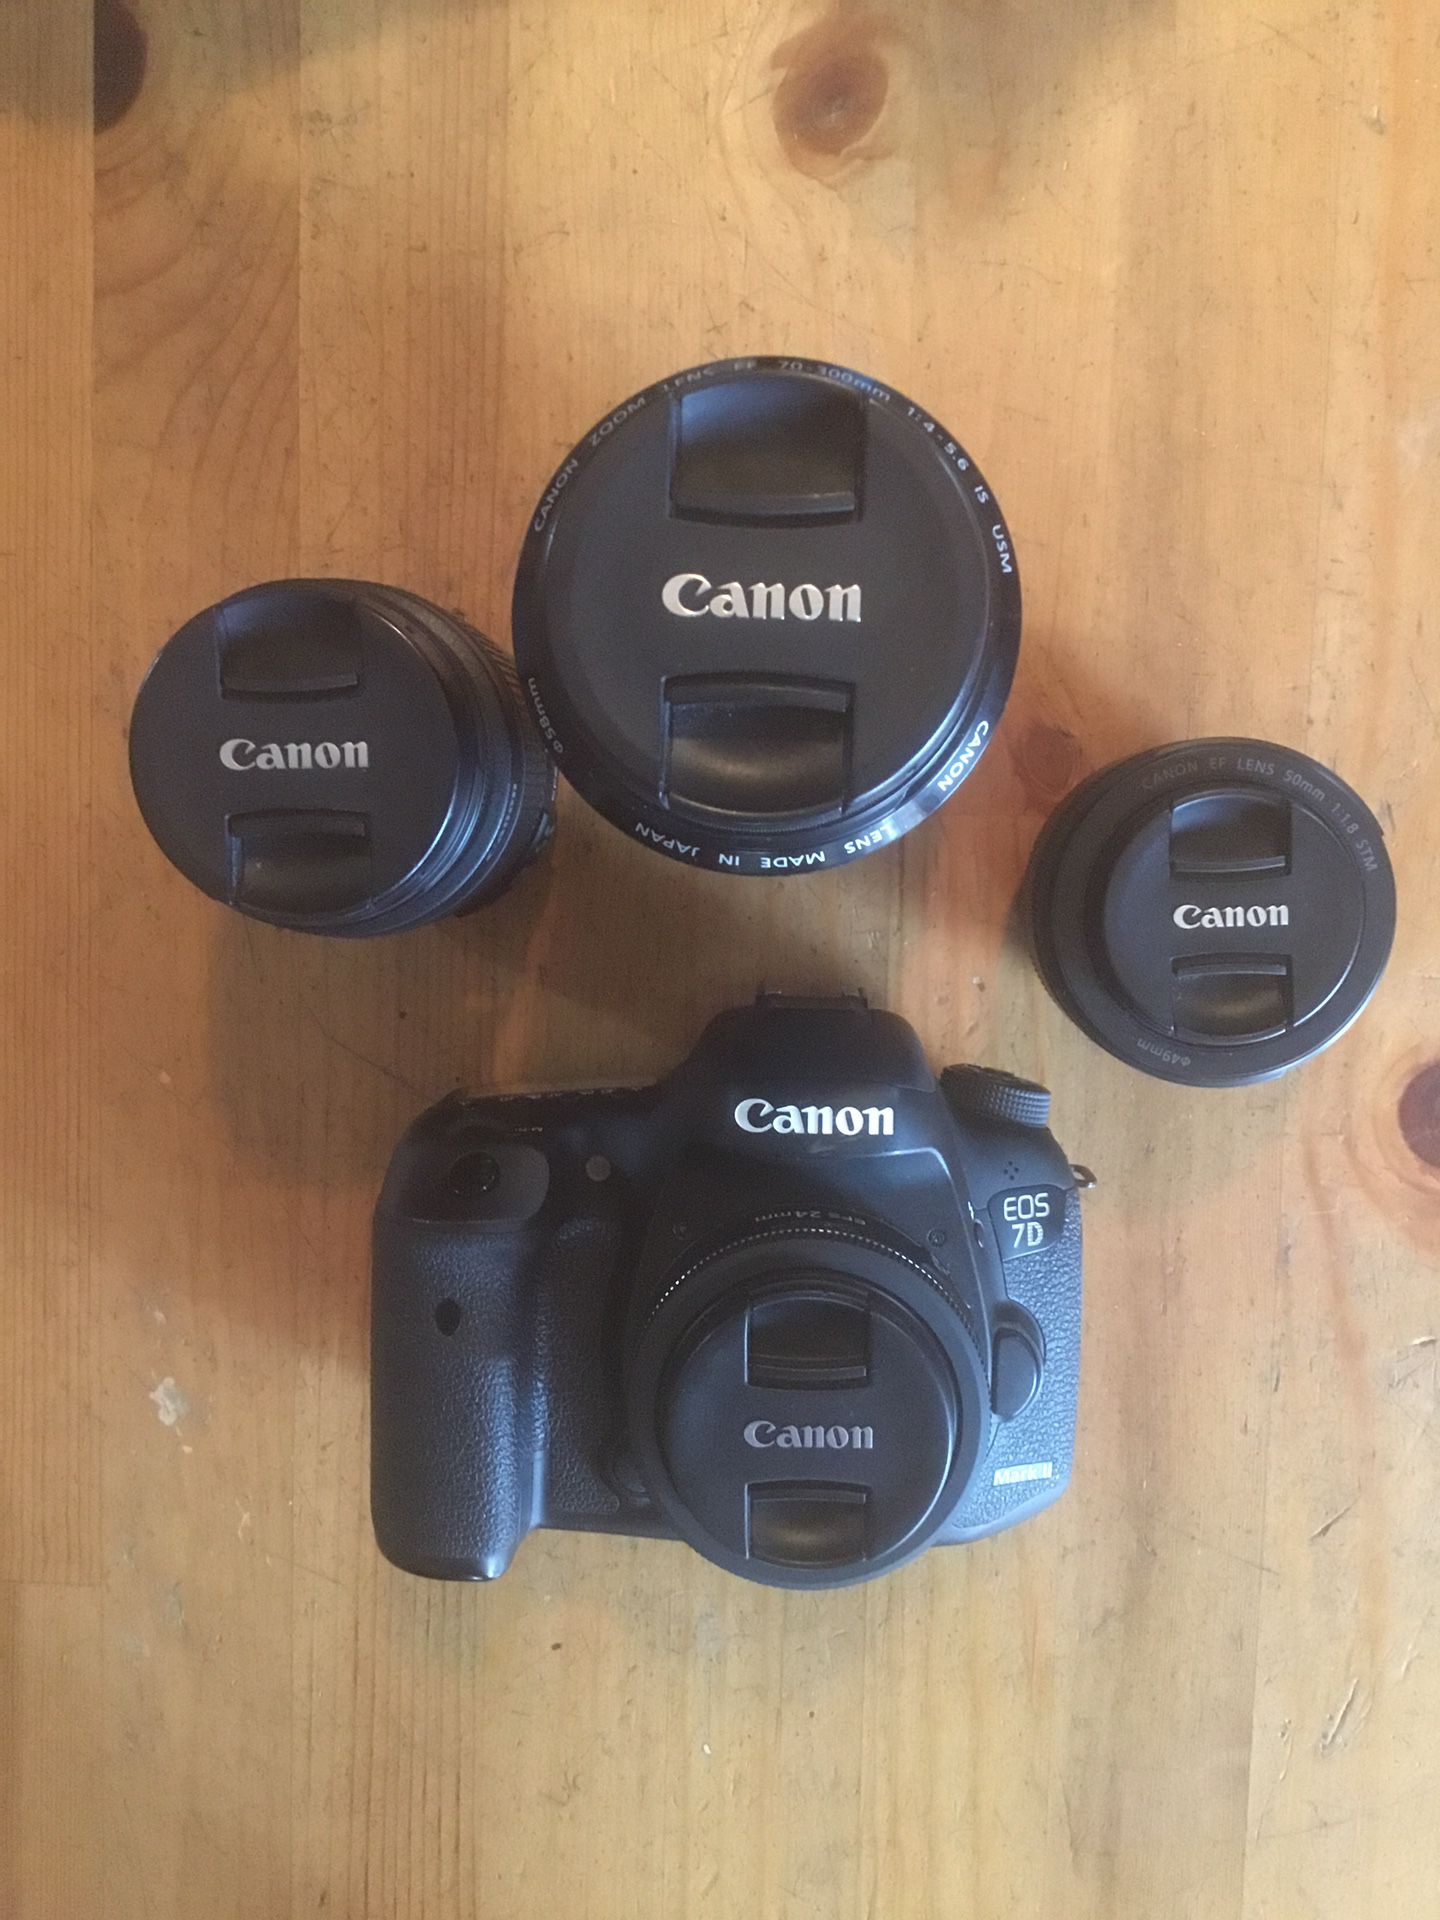 Canon 7d Mark 2 and other lenses